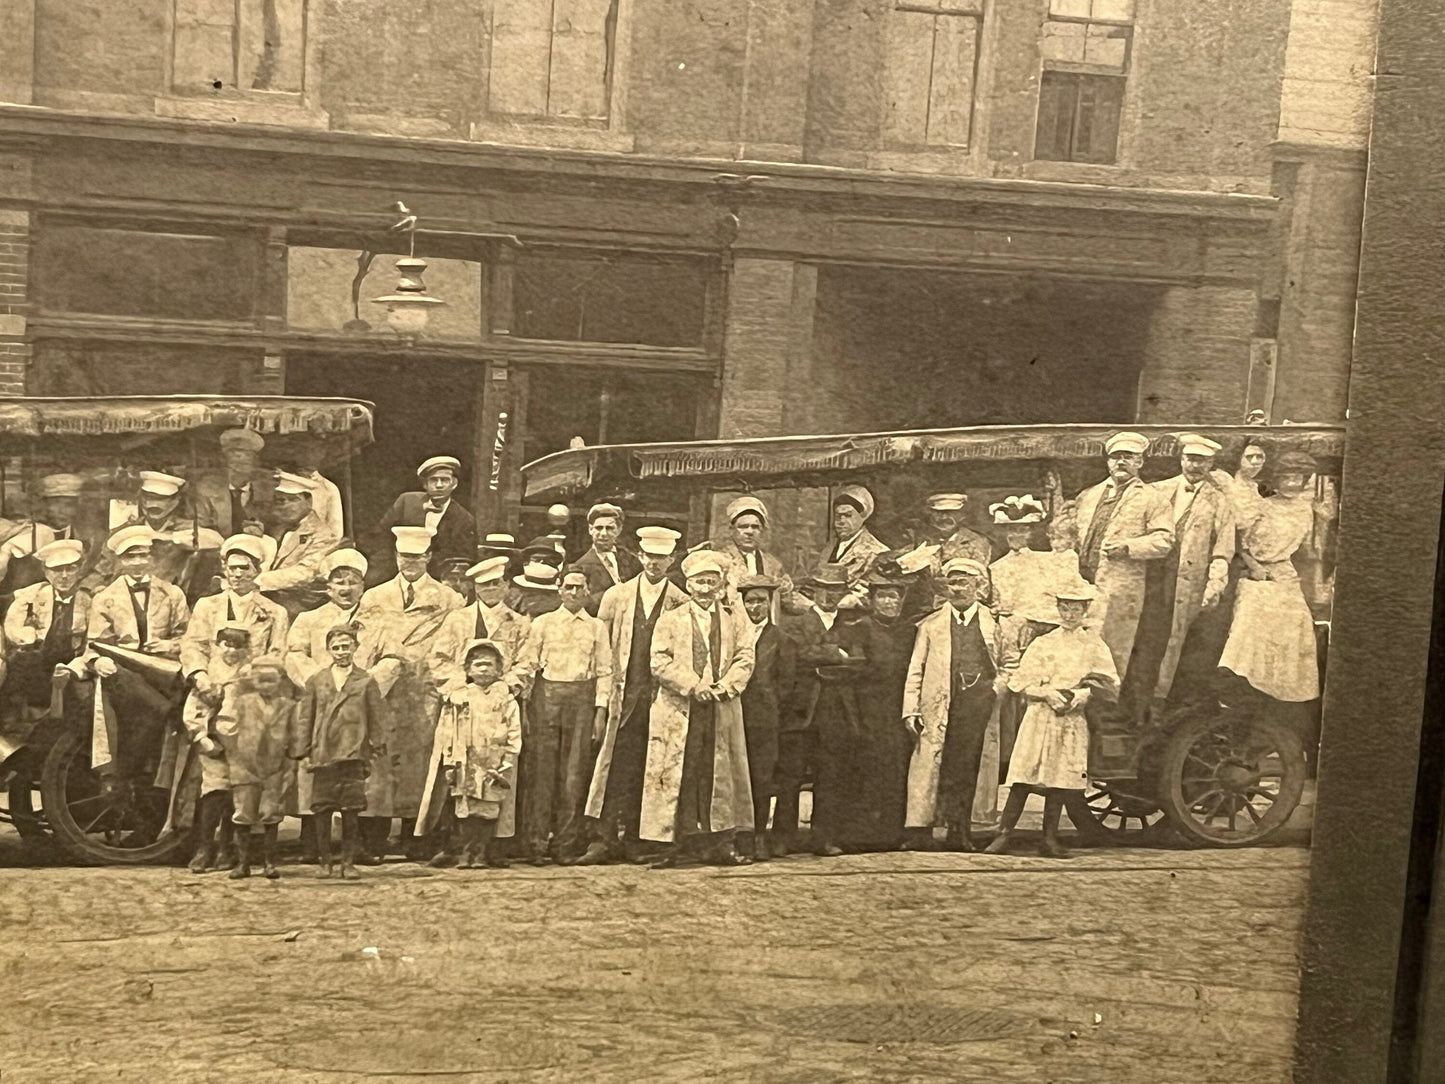 Antique photo occupational brewery Martin griffin beers & ale workers outside building 1910s